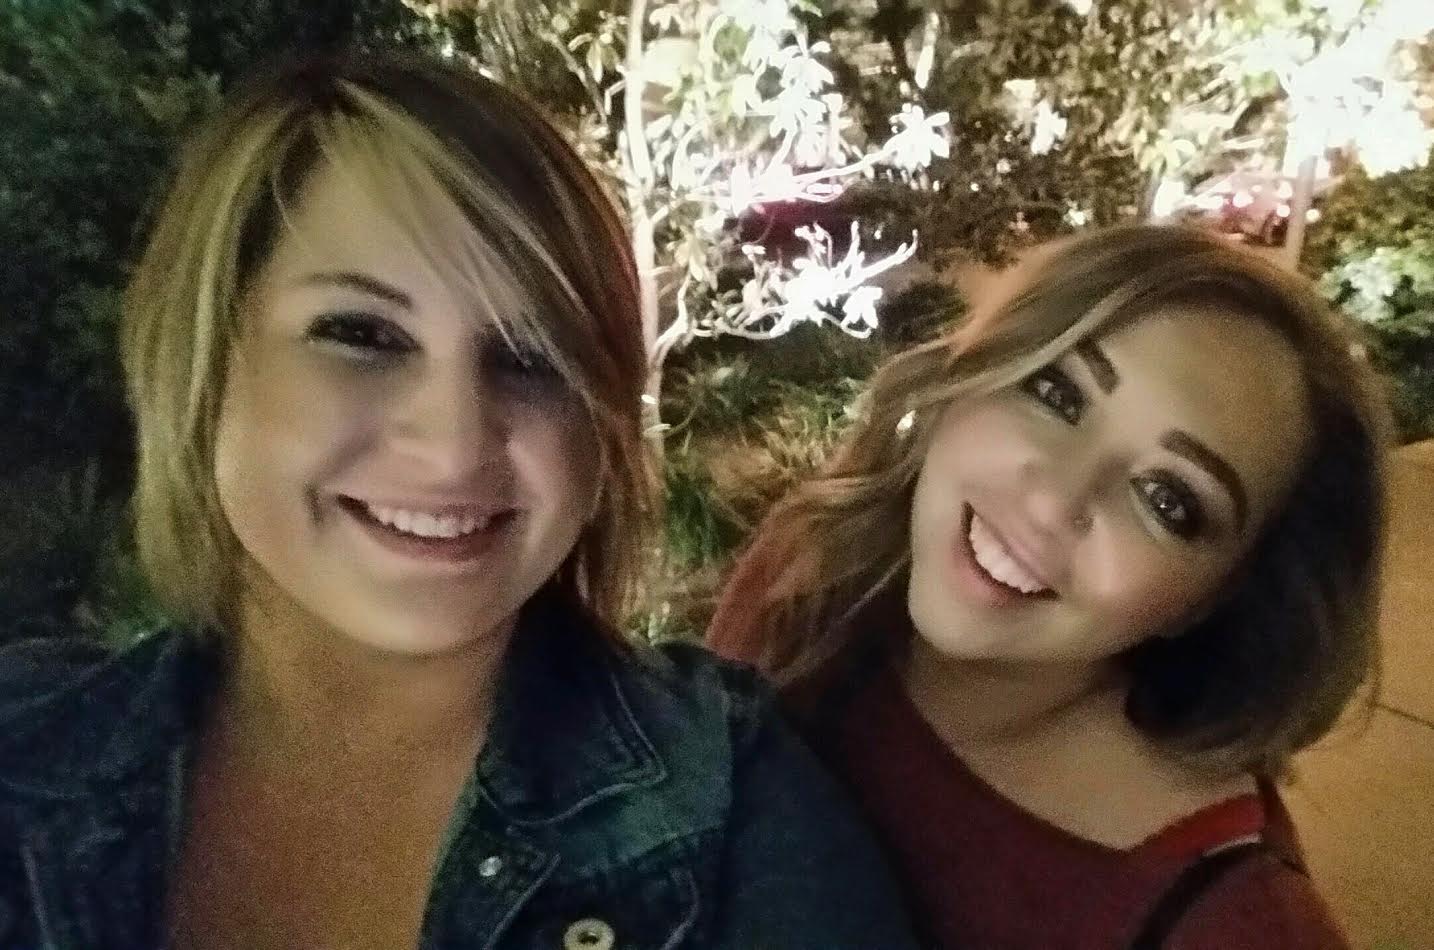 Ashley and friend smiling 